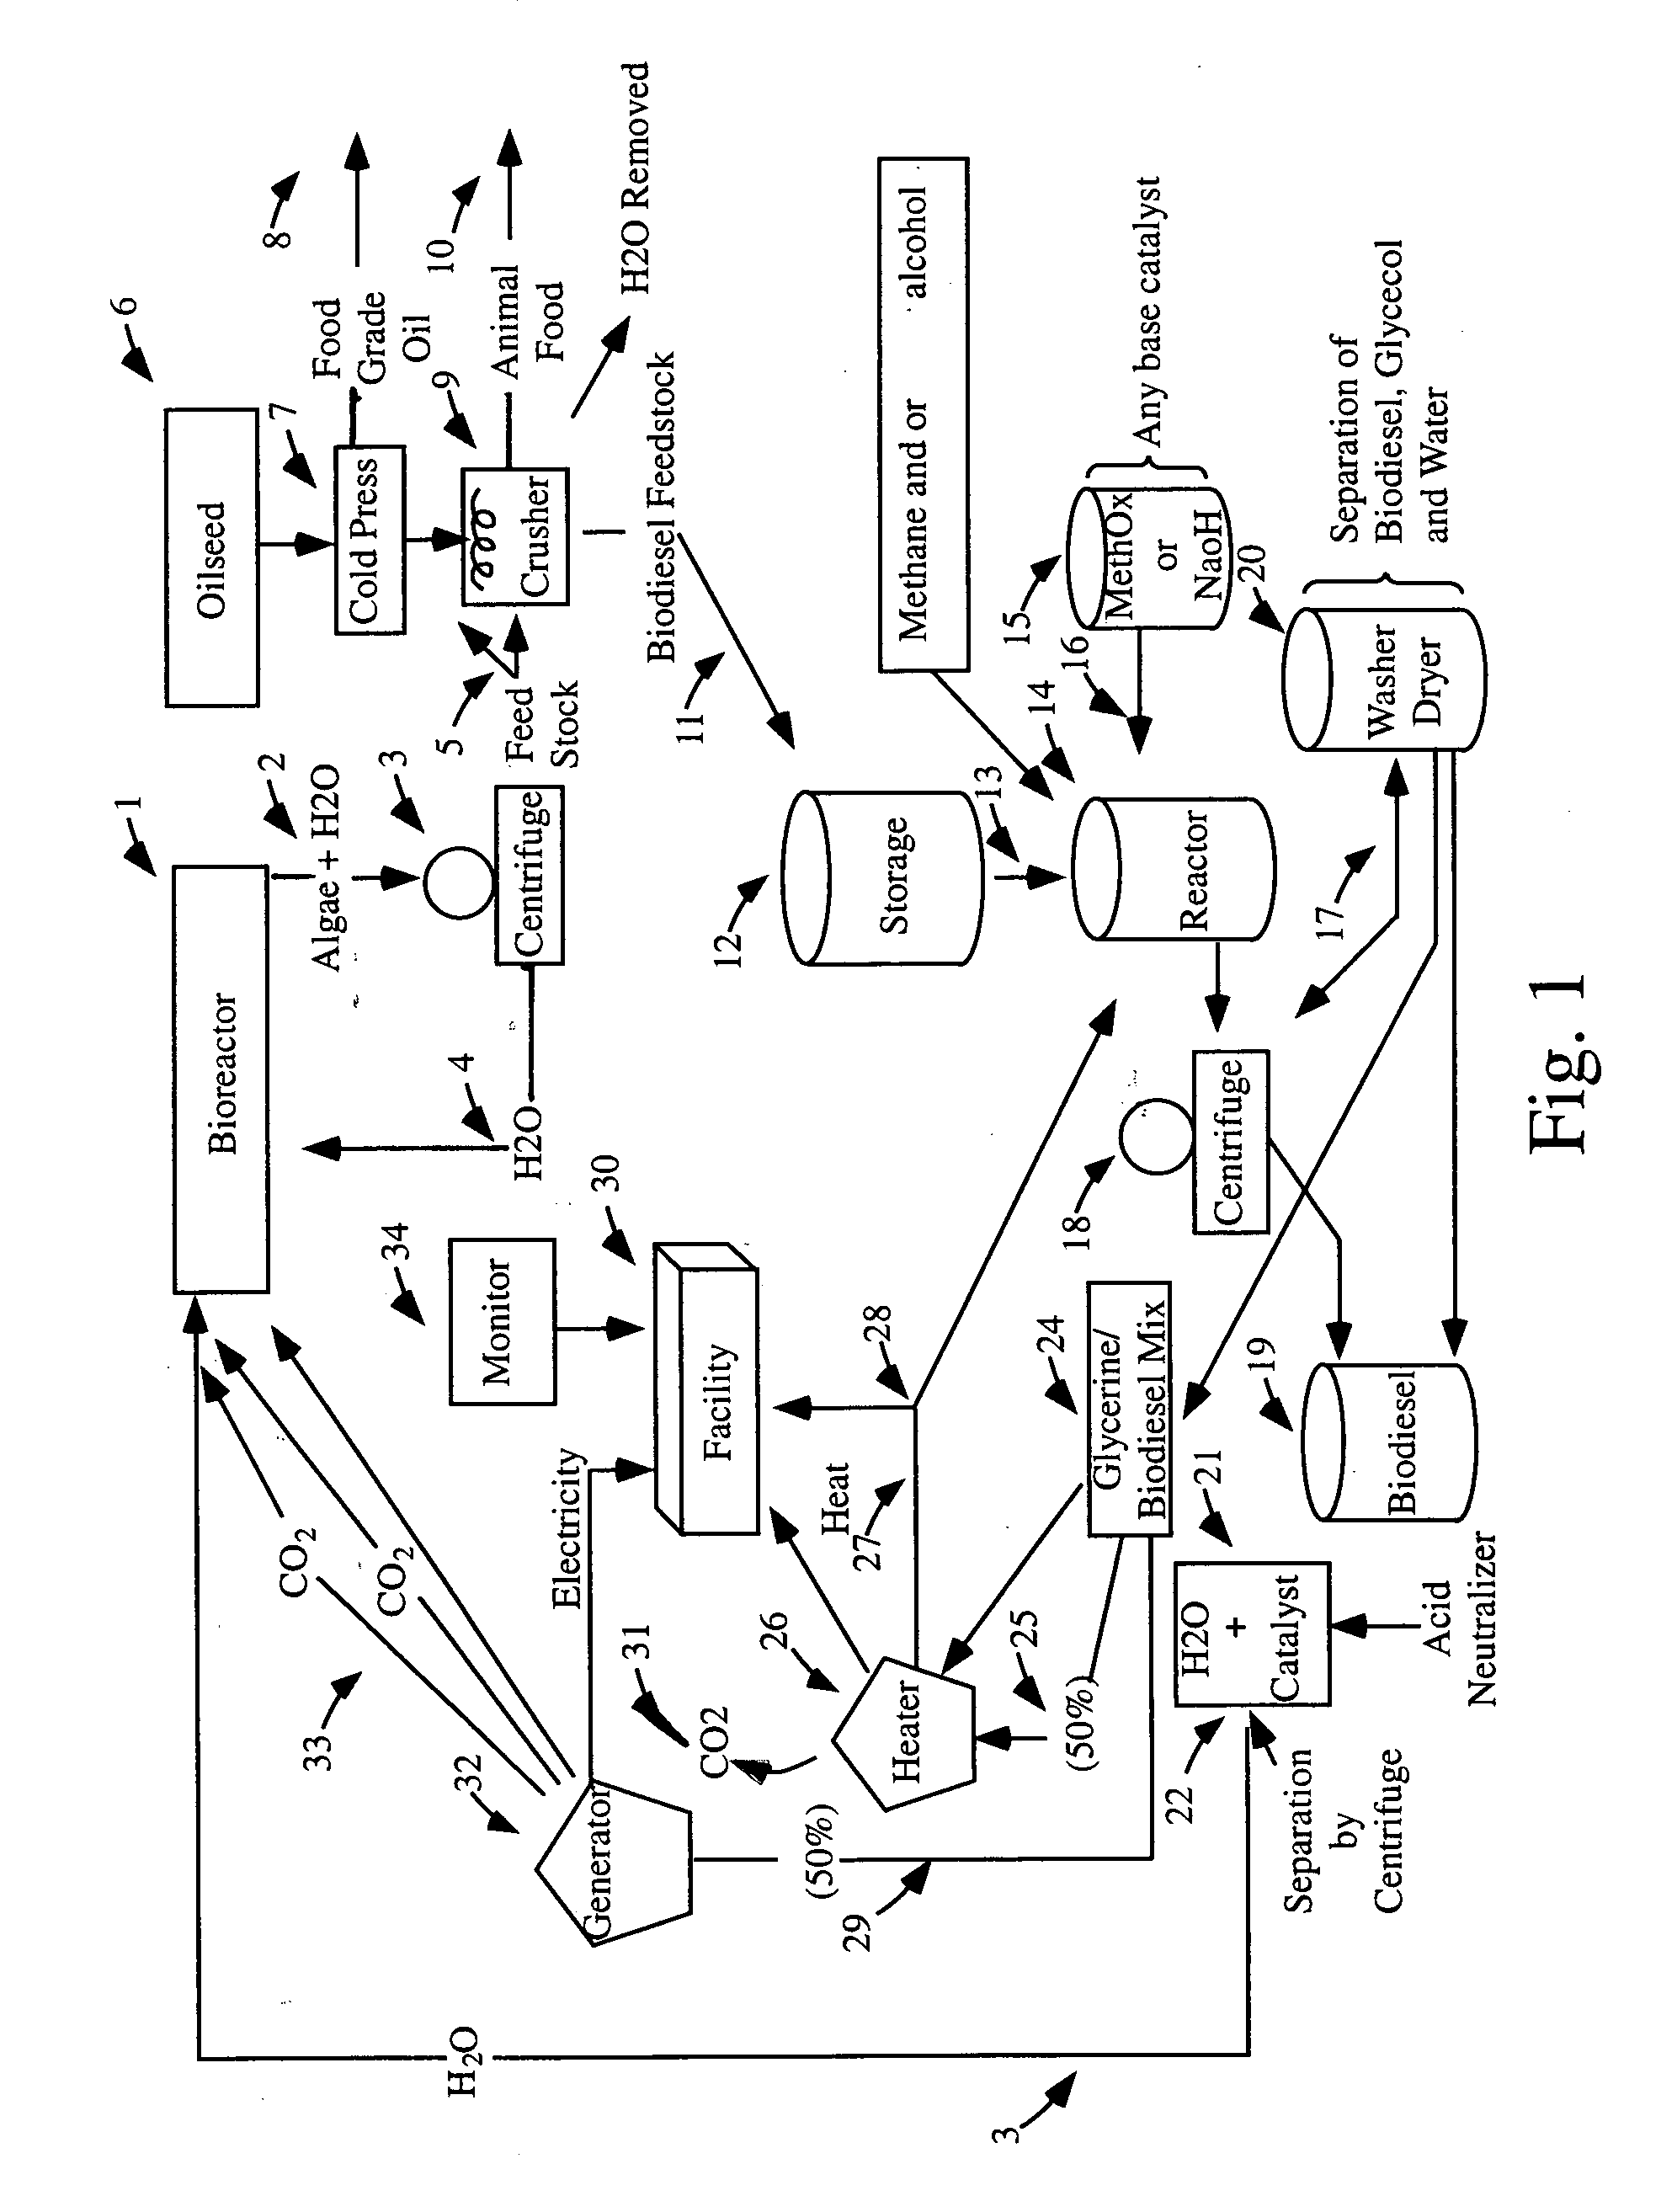 Systems and methods for production of biofuel